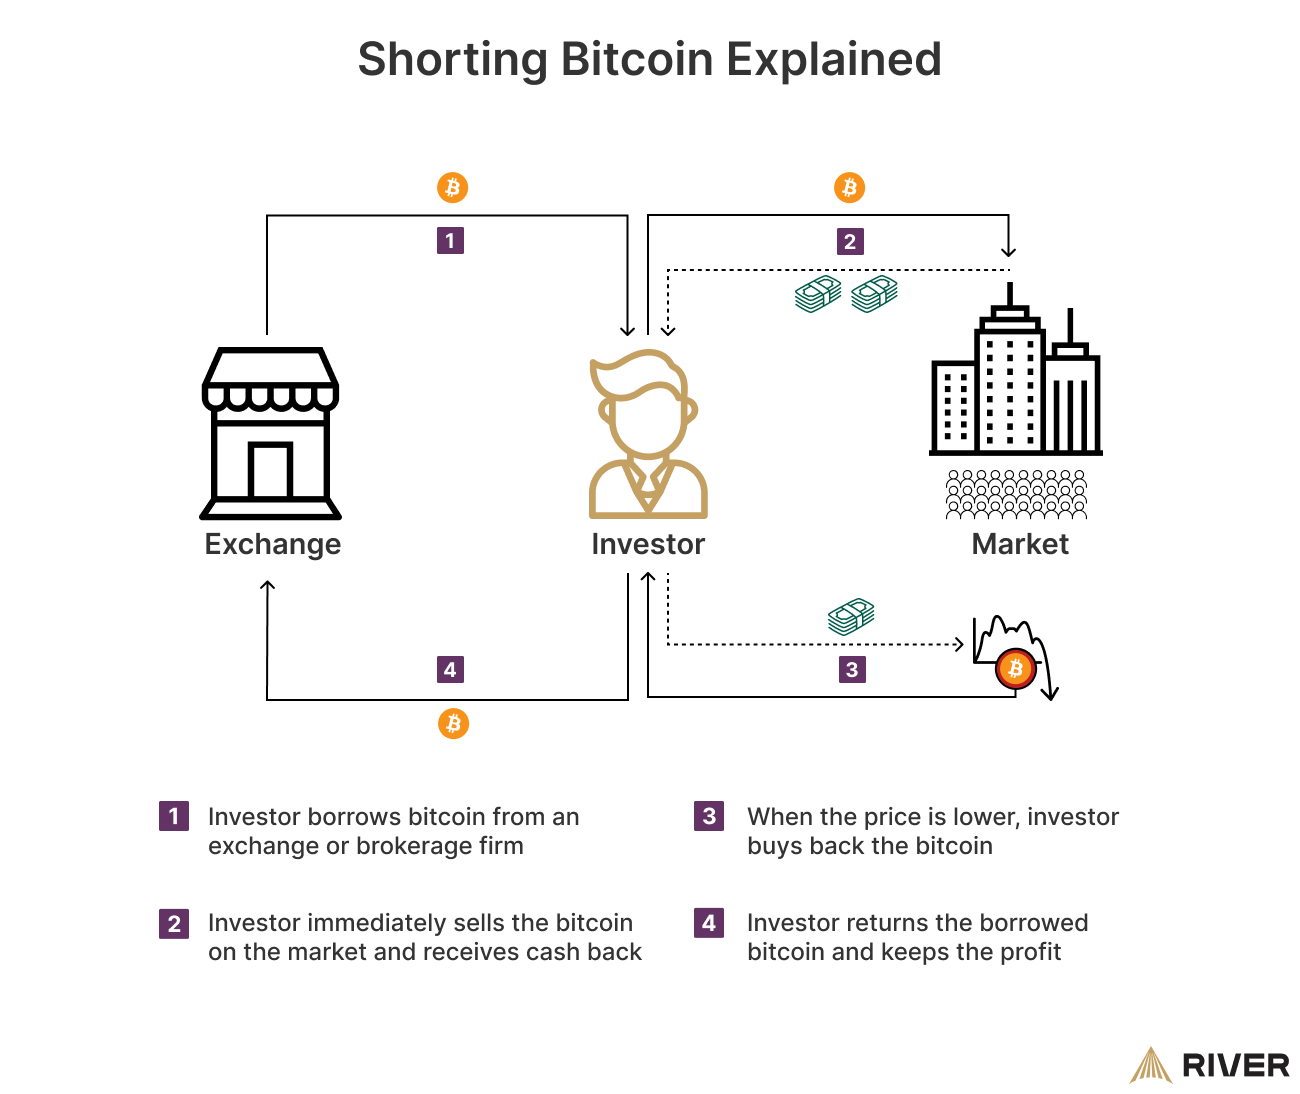 Infographic showing steps of shorting Bitcoin: Borrow from exchange, Sell borrowed Bitcoin, Buy back at lower price, Return Bitcoin and keep profit.